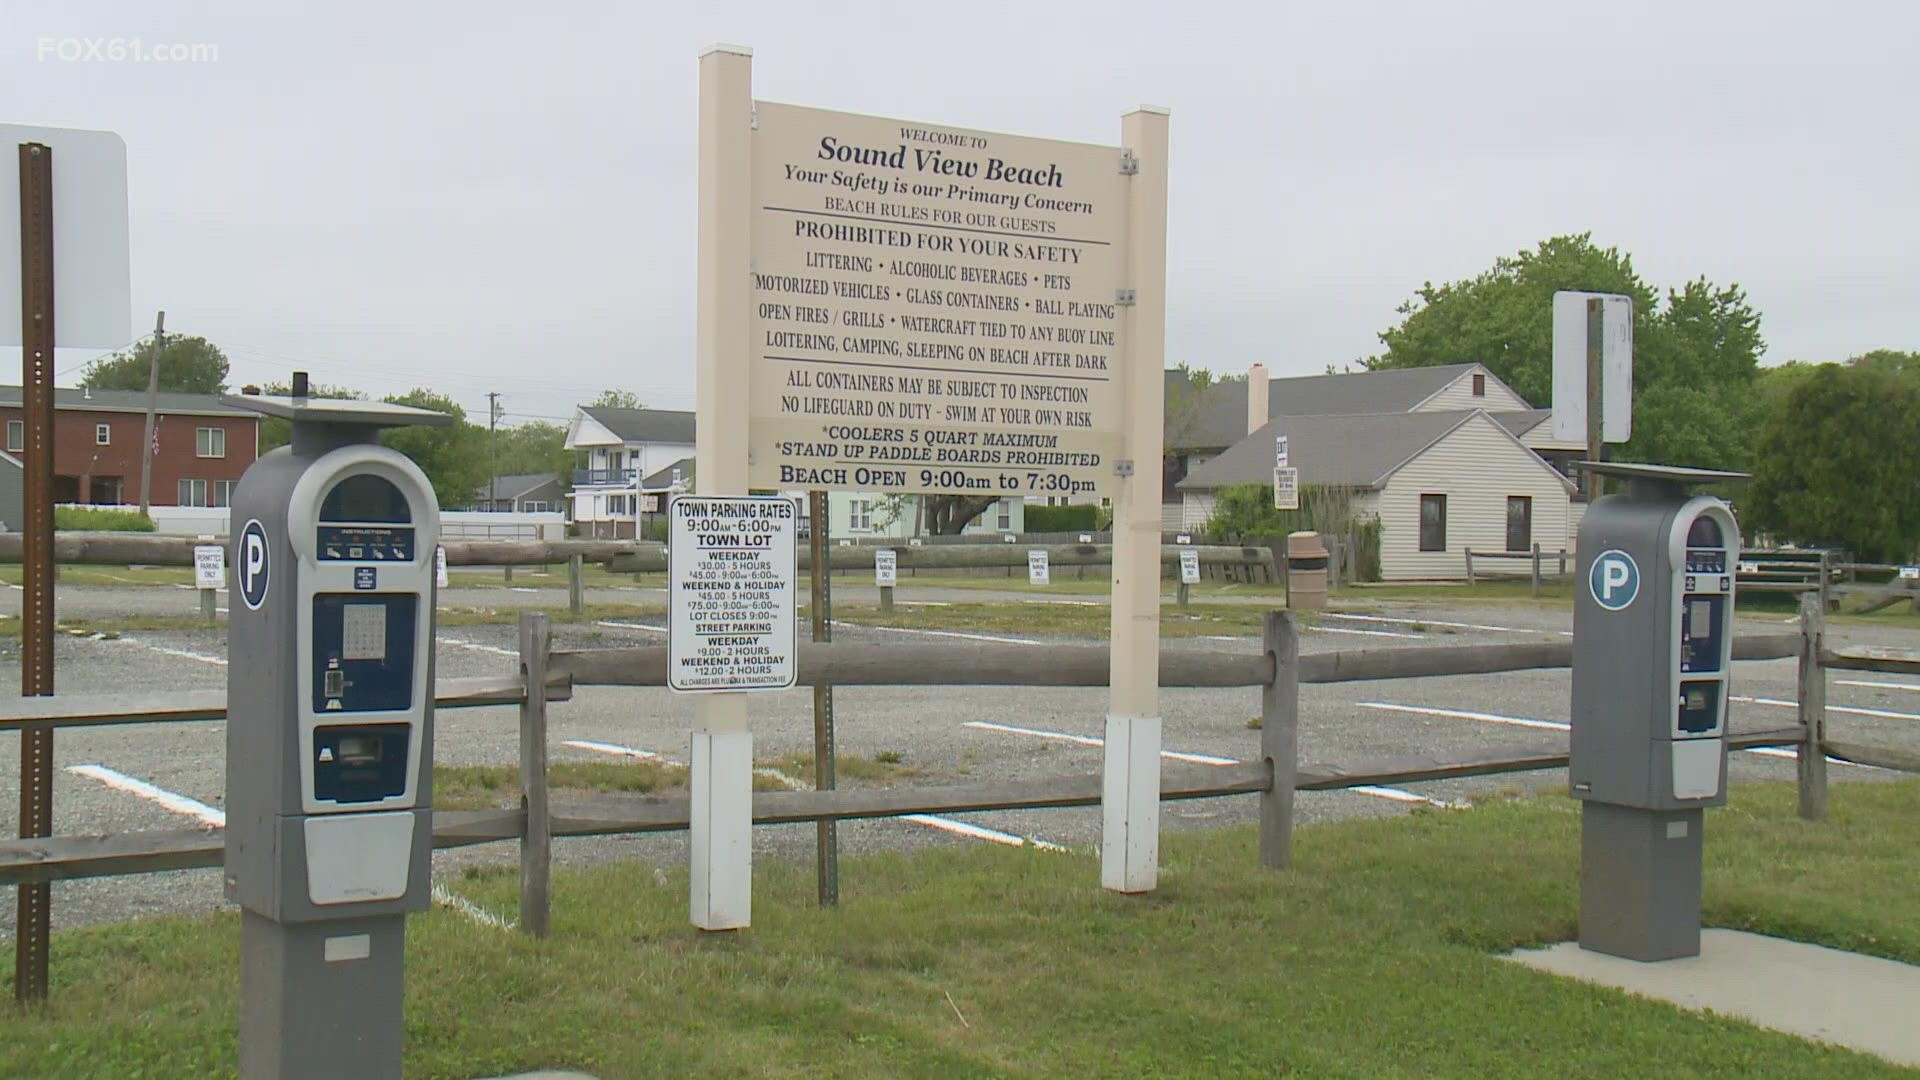 The daily rate in Old Lyme for parking on weekends is $75.